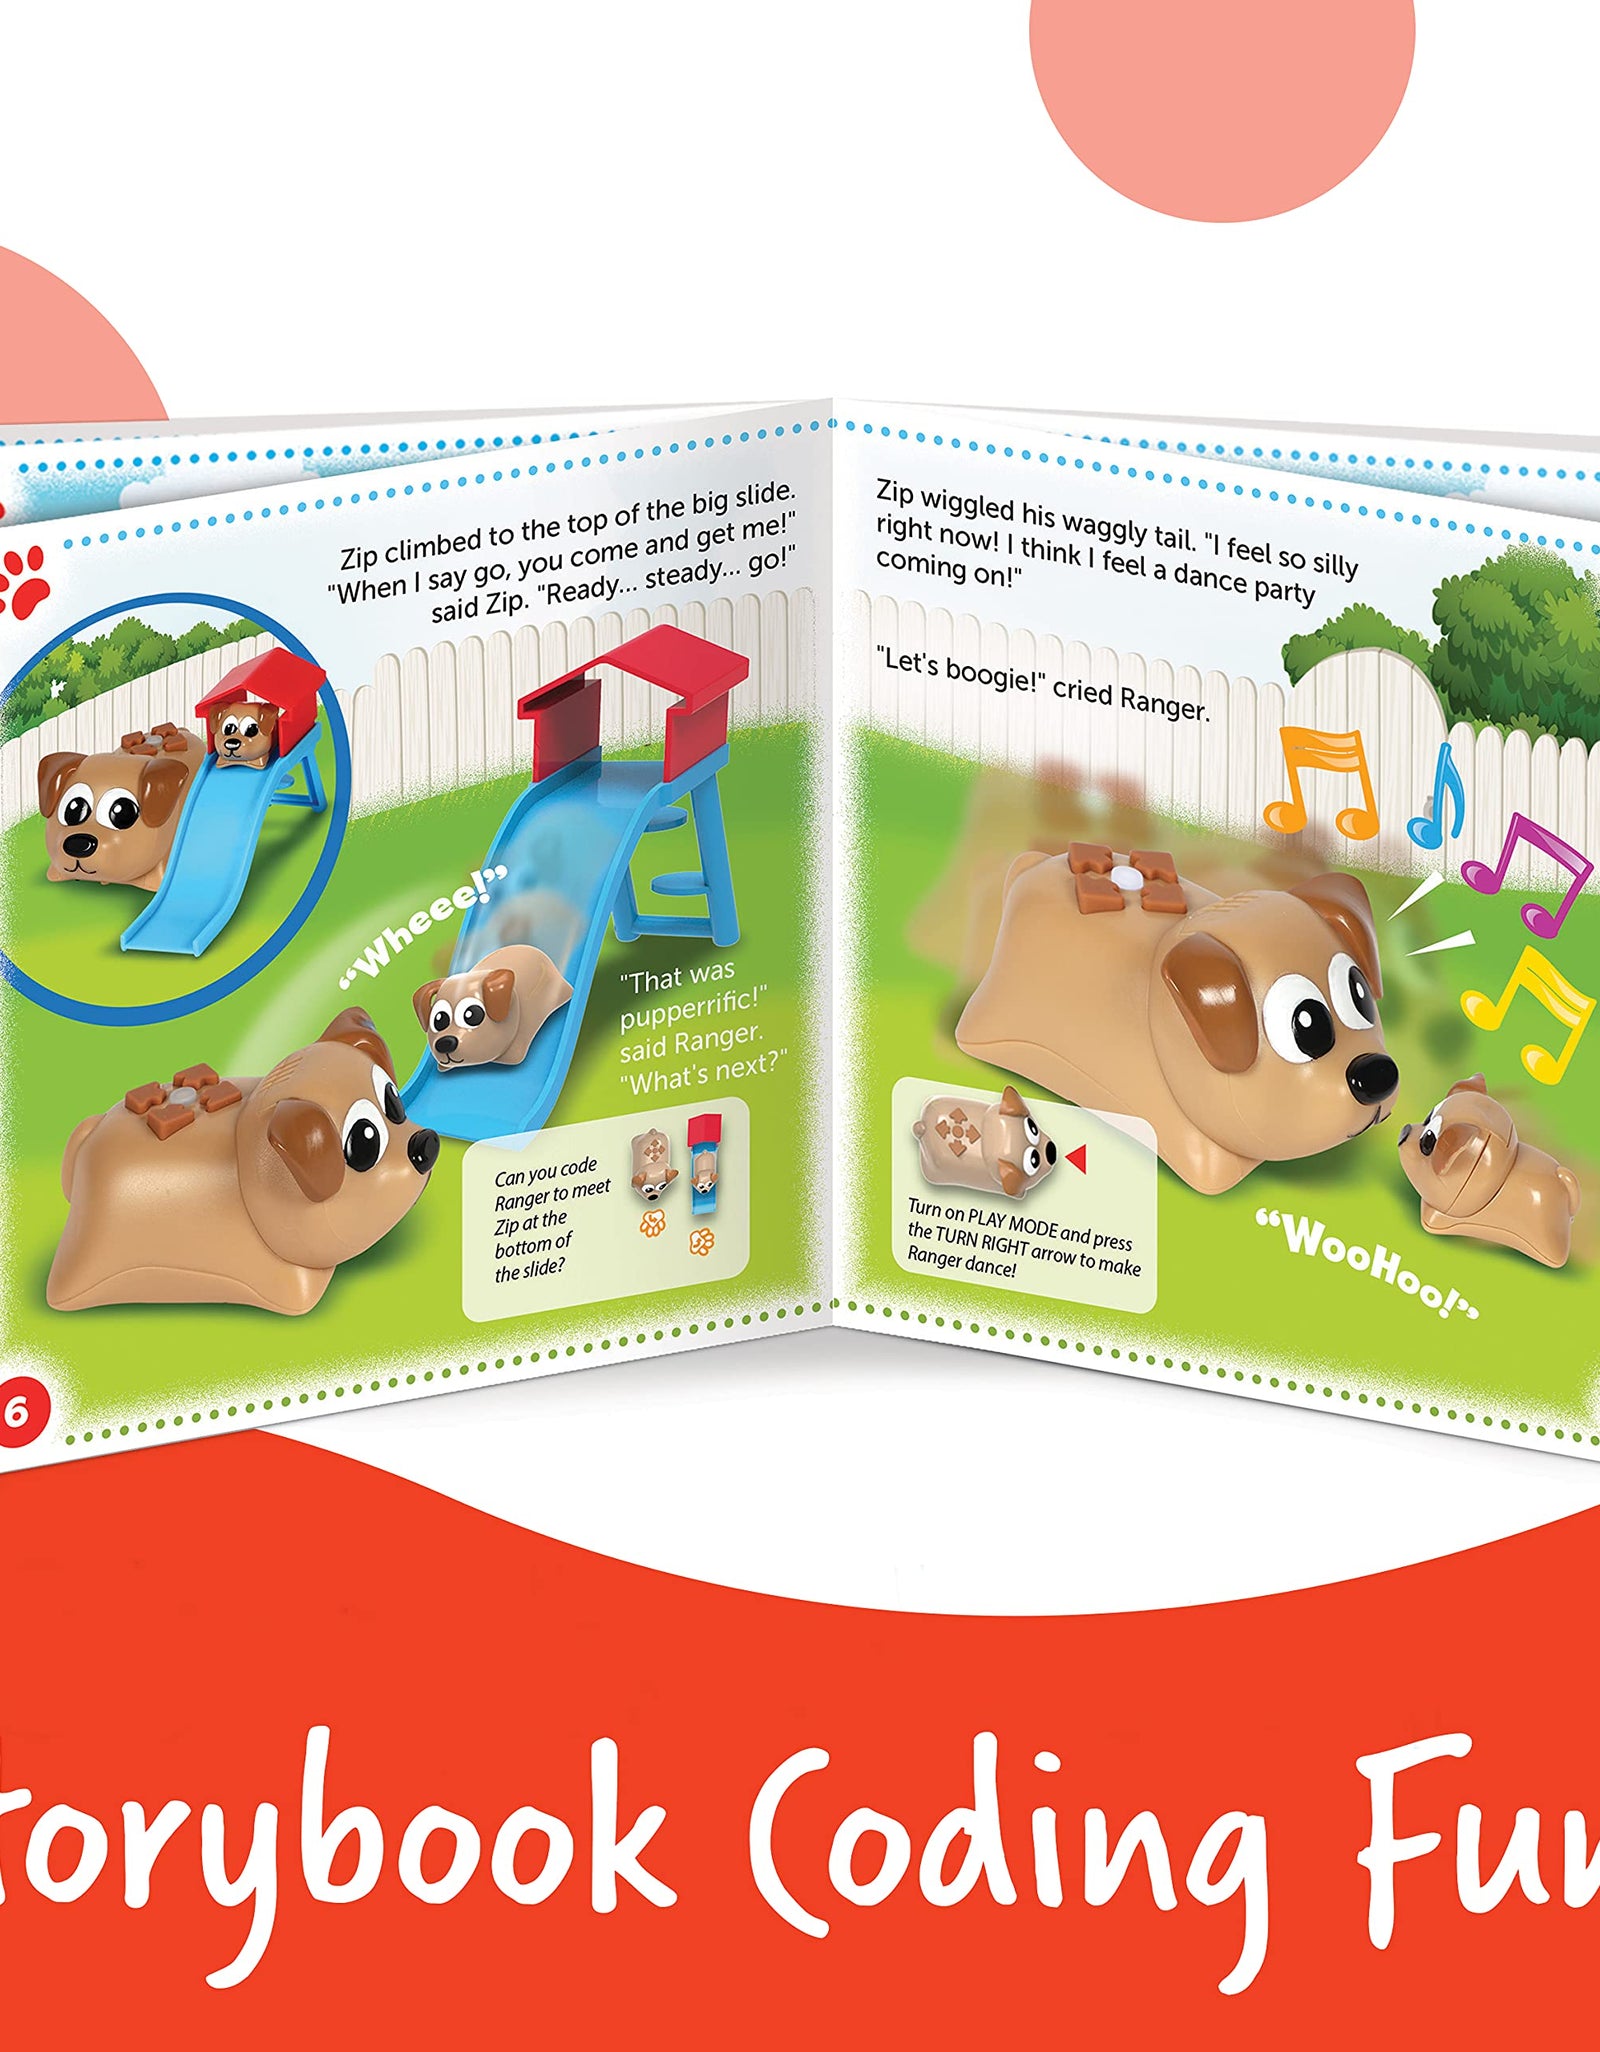 Learning Resources Coding Critters Ranger & Zip, Screen-Free Early Coding Toy For Kids, Interactive STEM Coding Pet, 22 Piece Set, Ages 4+